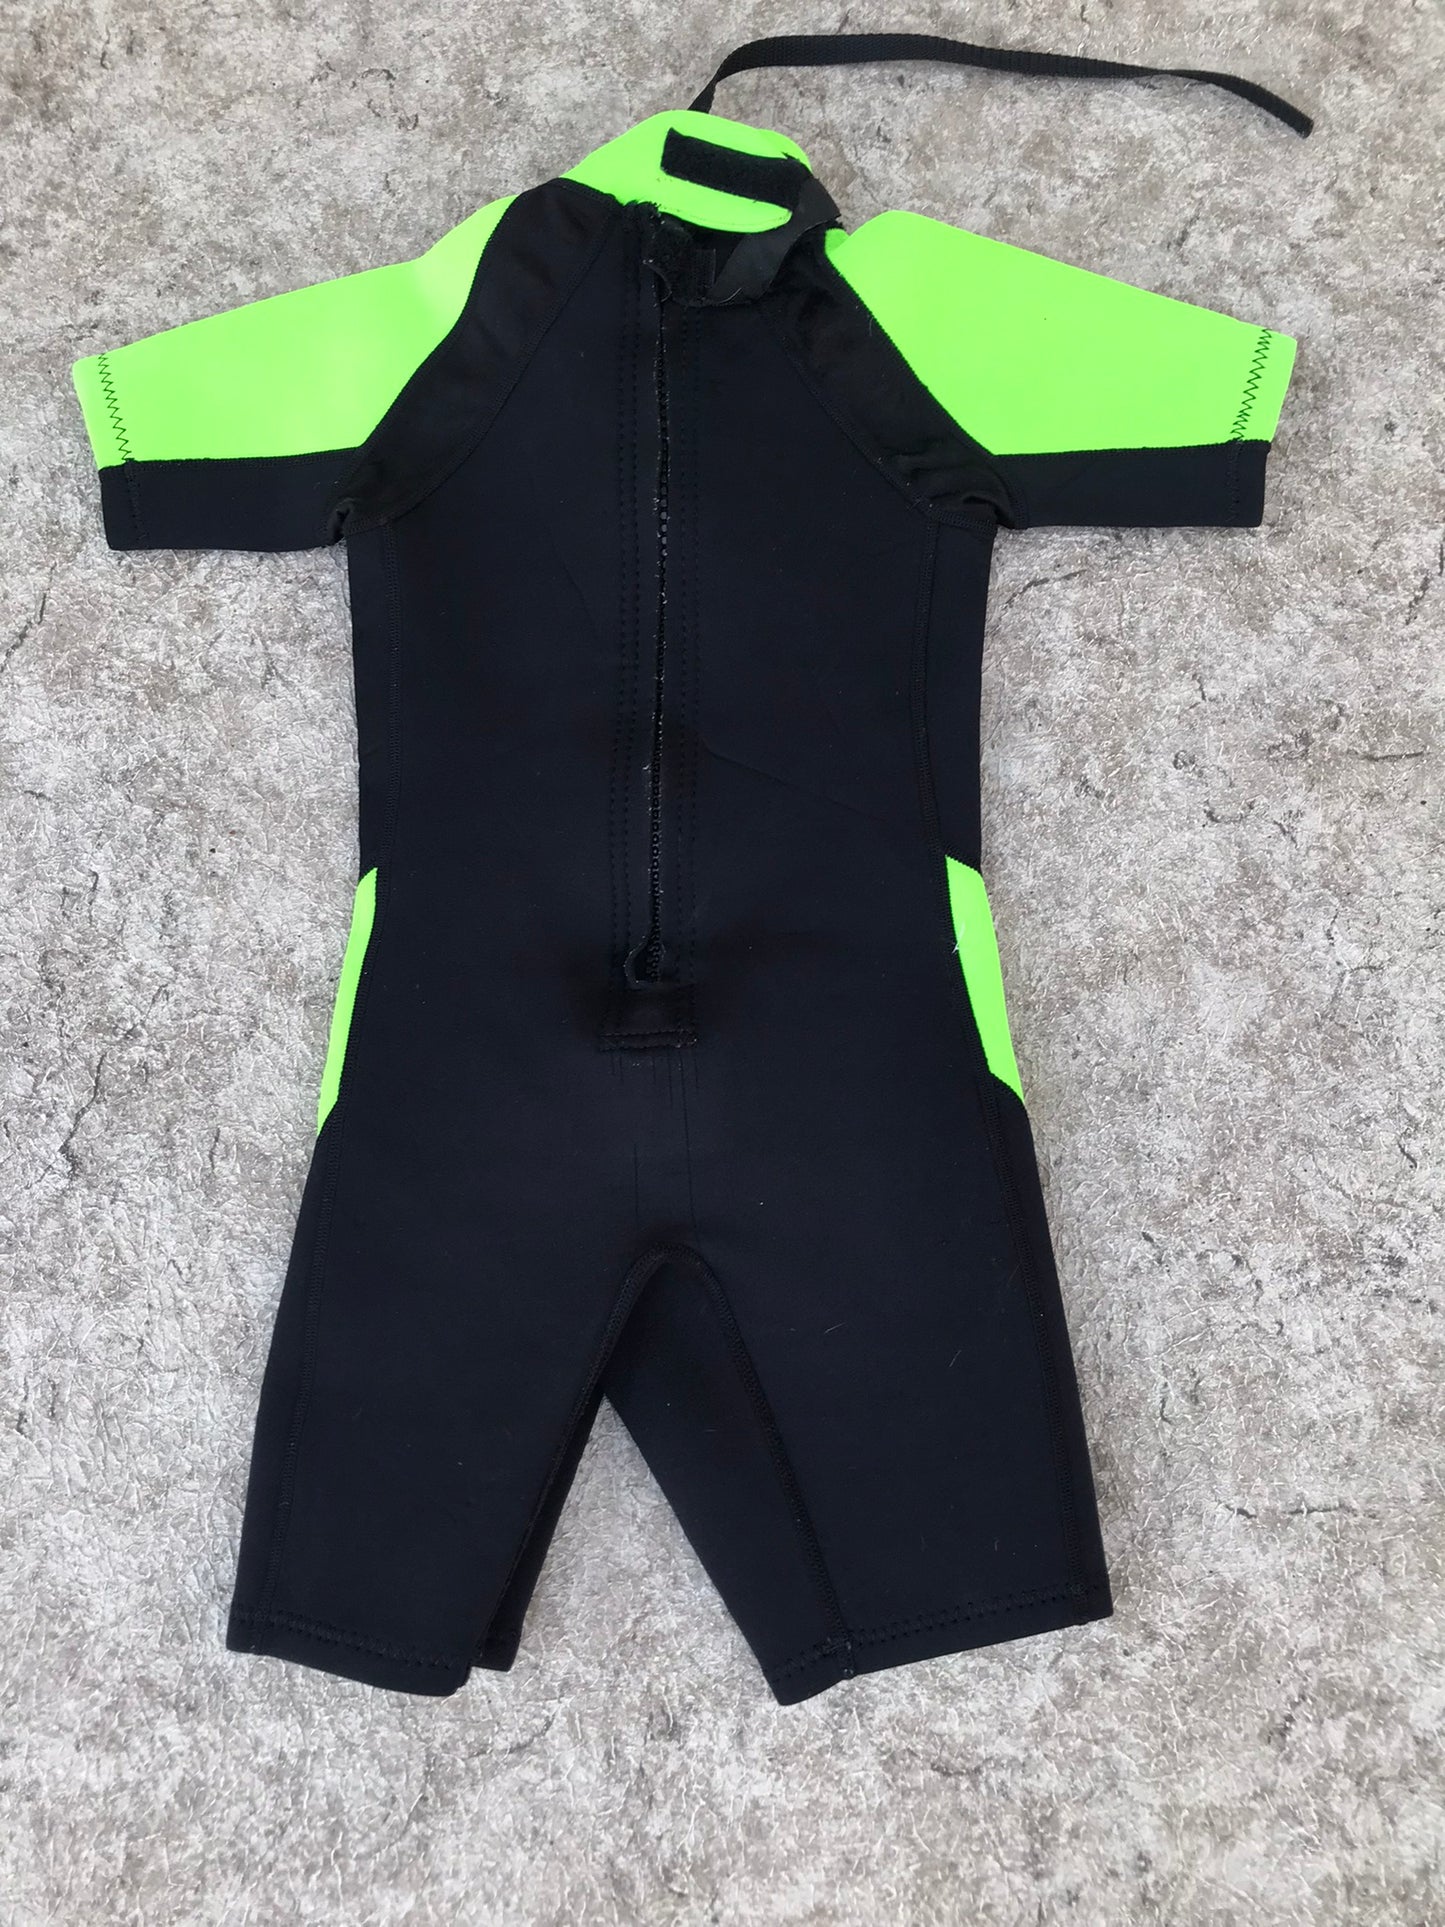 Wetsuit Child Size 7-8 Deep See Neoprene 2-3mm Black Lime